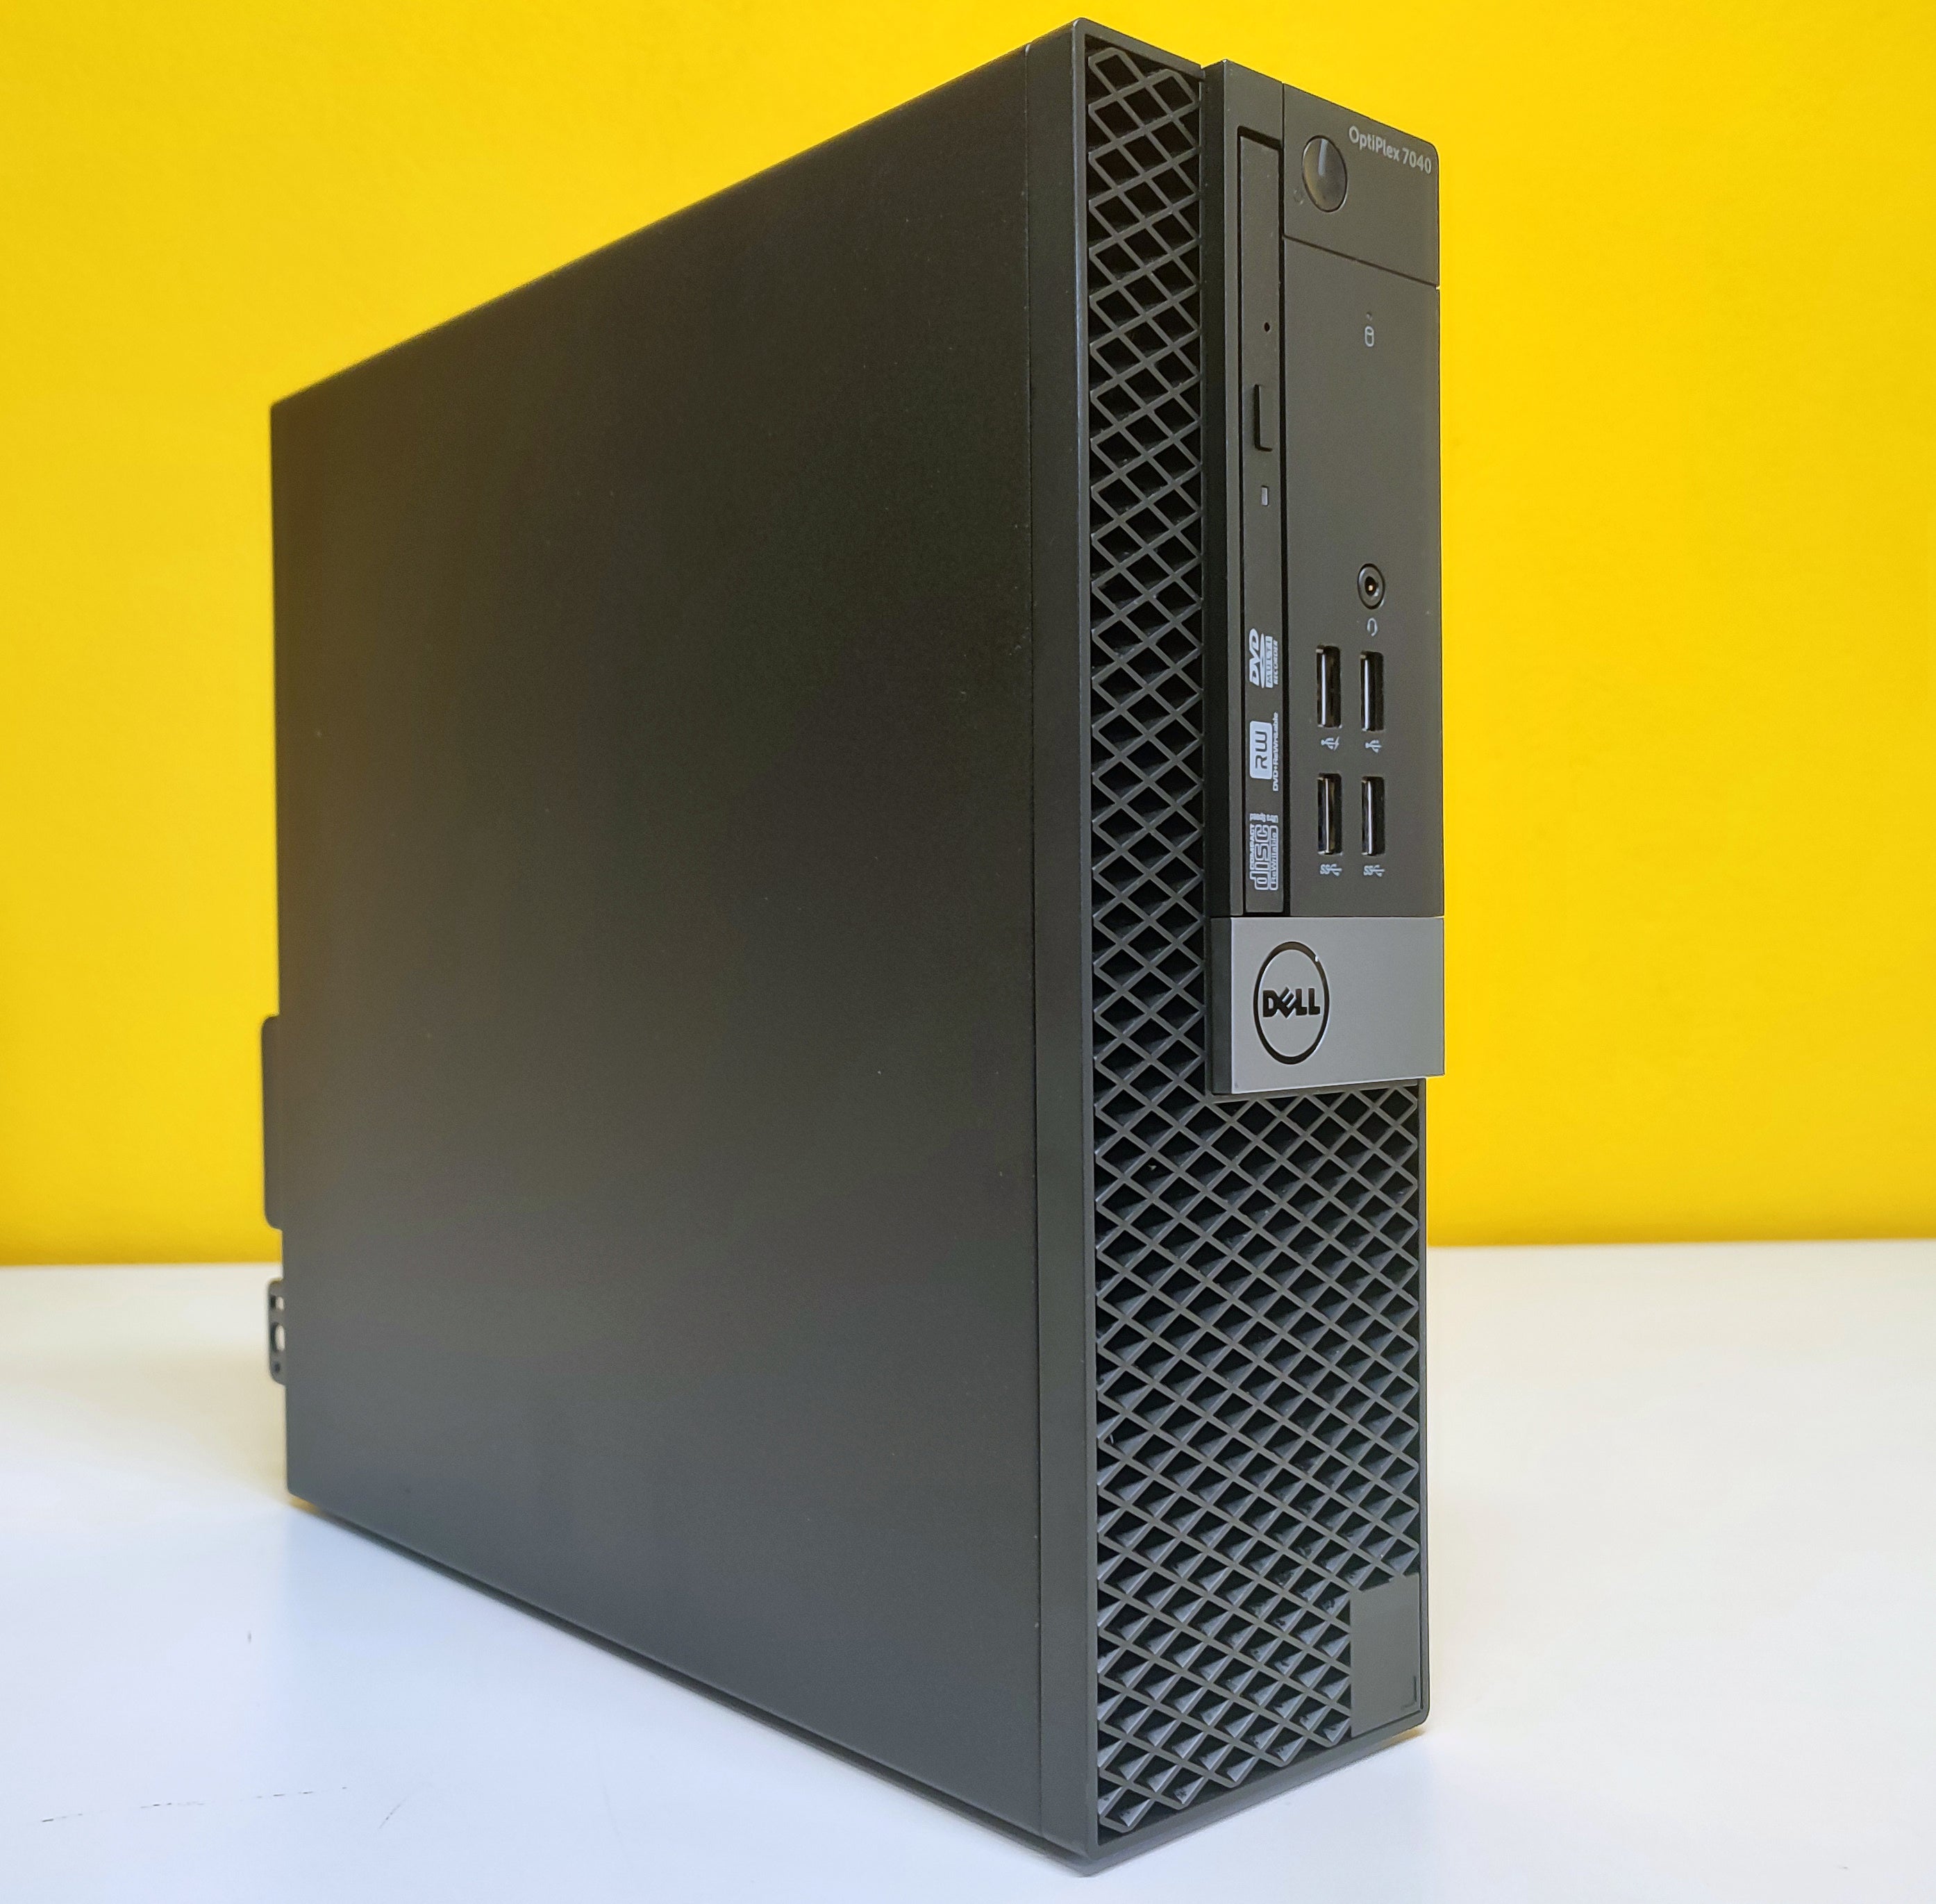 DELL OptiPlex 7040 SFF | Intel Core i7-6700T 2.8Ghz | Ram 8Gb | SSD 256Gb | HDMI Windows 10 Pro The compact and elegant PC for a powerful and reliable workstation